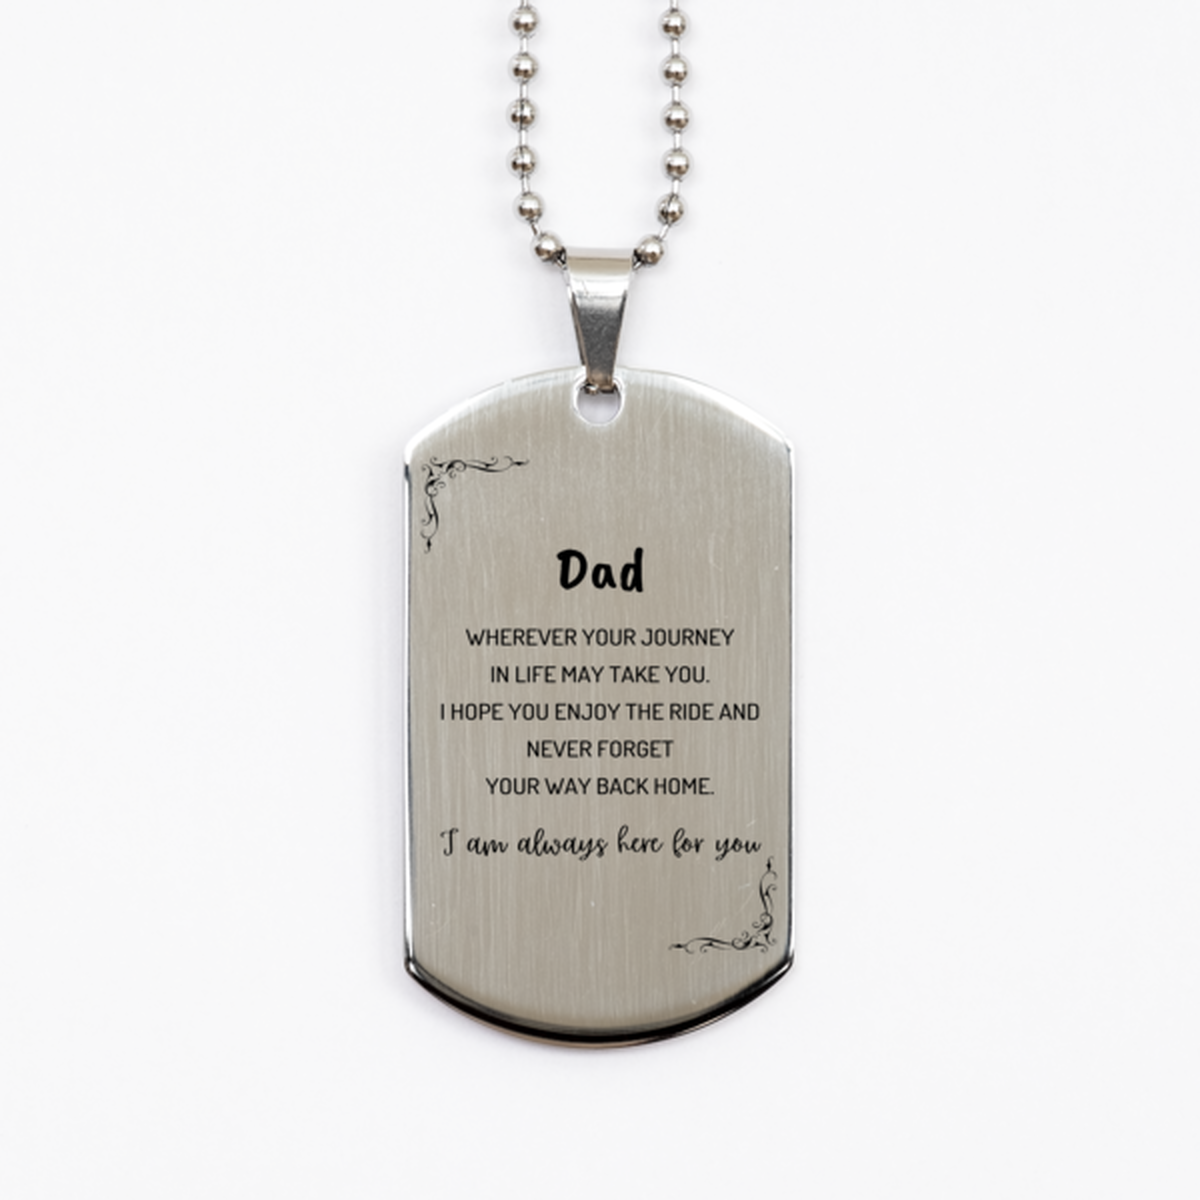 Dad wherever your journey in life may take you, I am always here for you Dad Silver Dog Tag, Awesome Christmas Gifts For Dad, Dad Birthday Gifts for Men Women Family Loved One